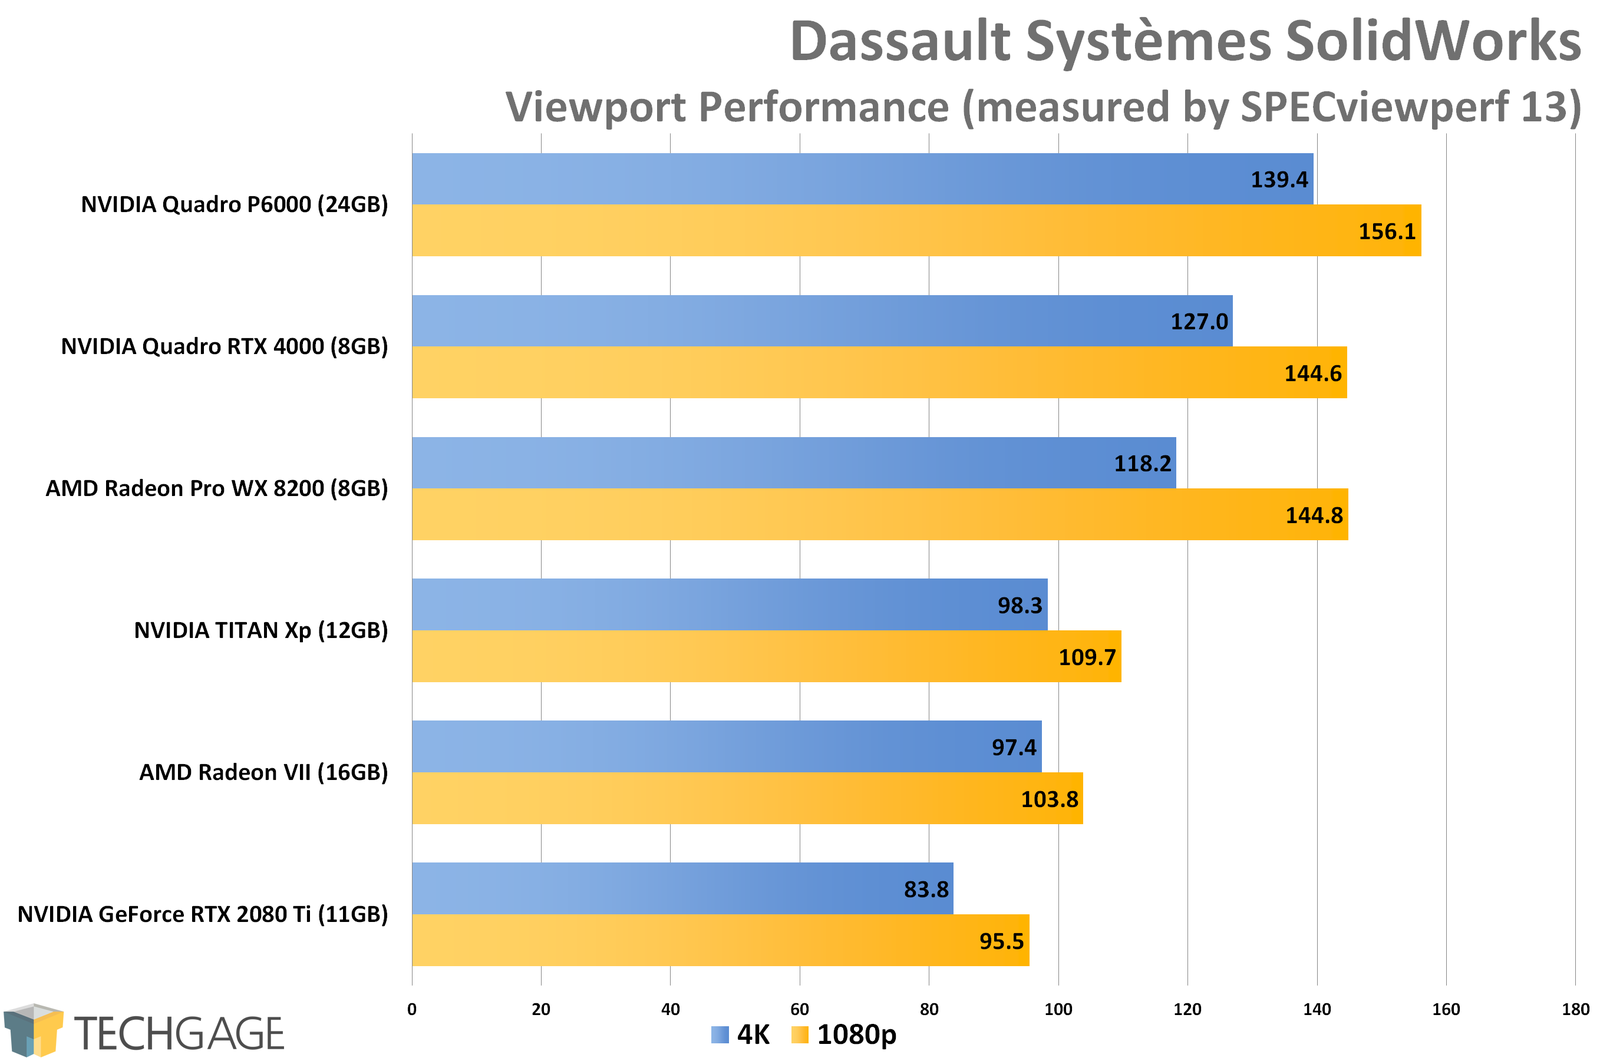 Dassault-Systemes-SolidWorks-Viewport-Performance-AMD-Radeon-VII.png